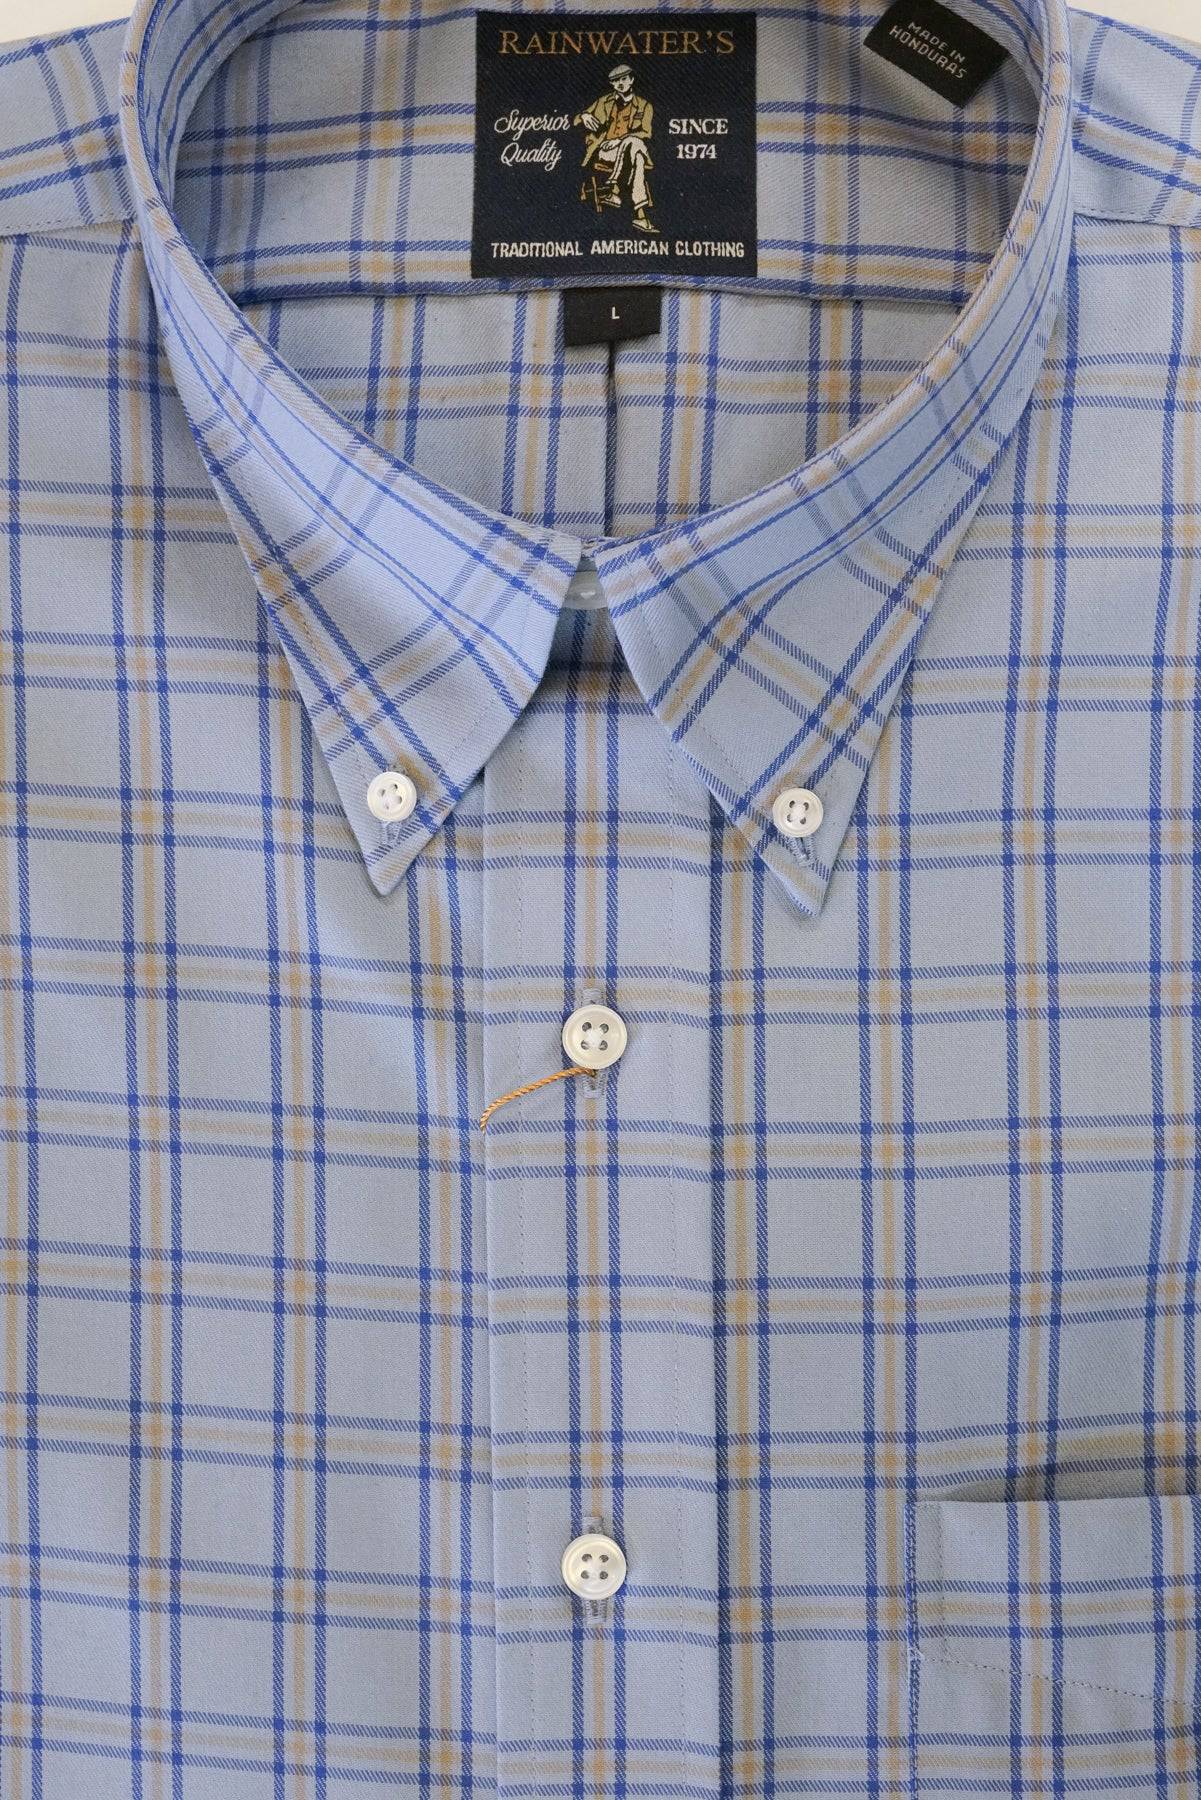 Blue With Navy & Gold Windowpane Button Down Wrinkle Free Sport Shirt by Rainwater's - Rainwater's Men's Clothing and Tuxedo Rental